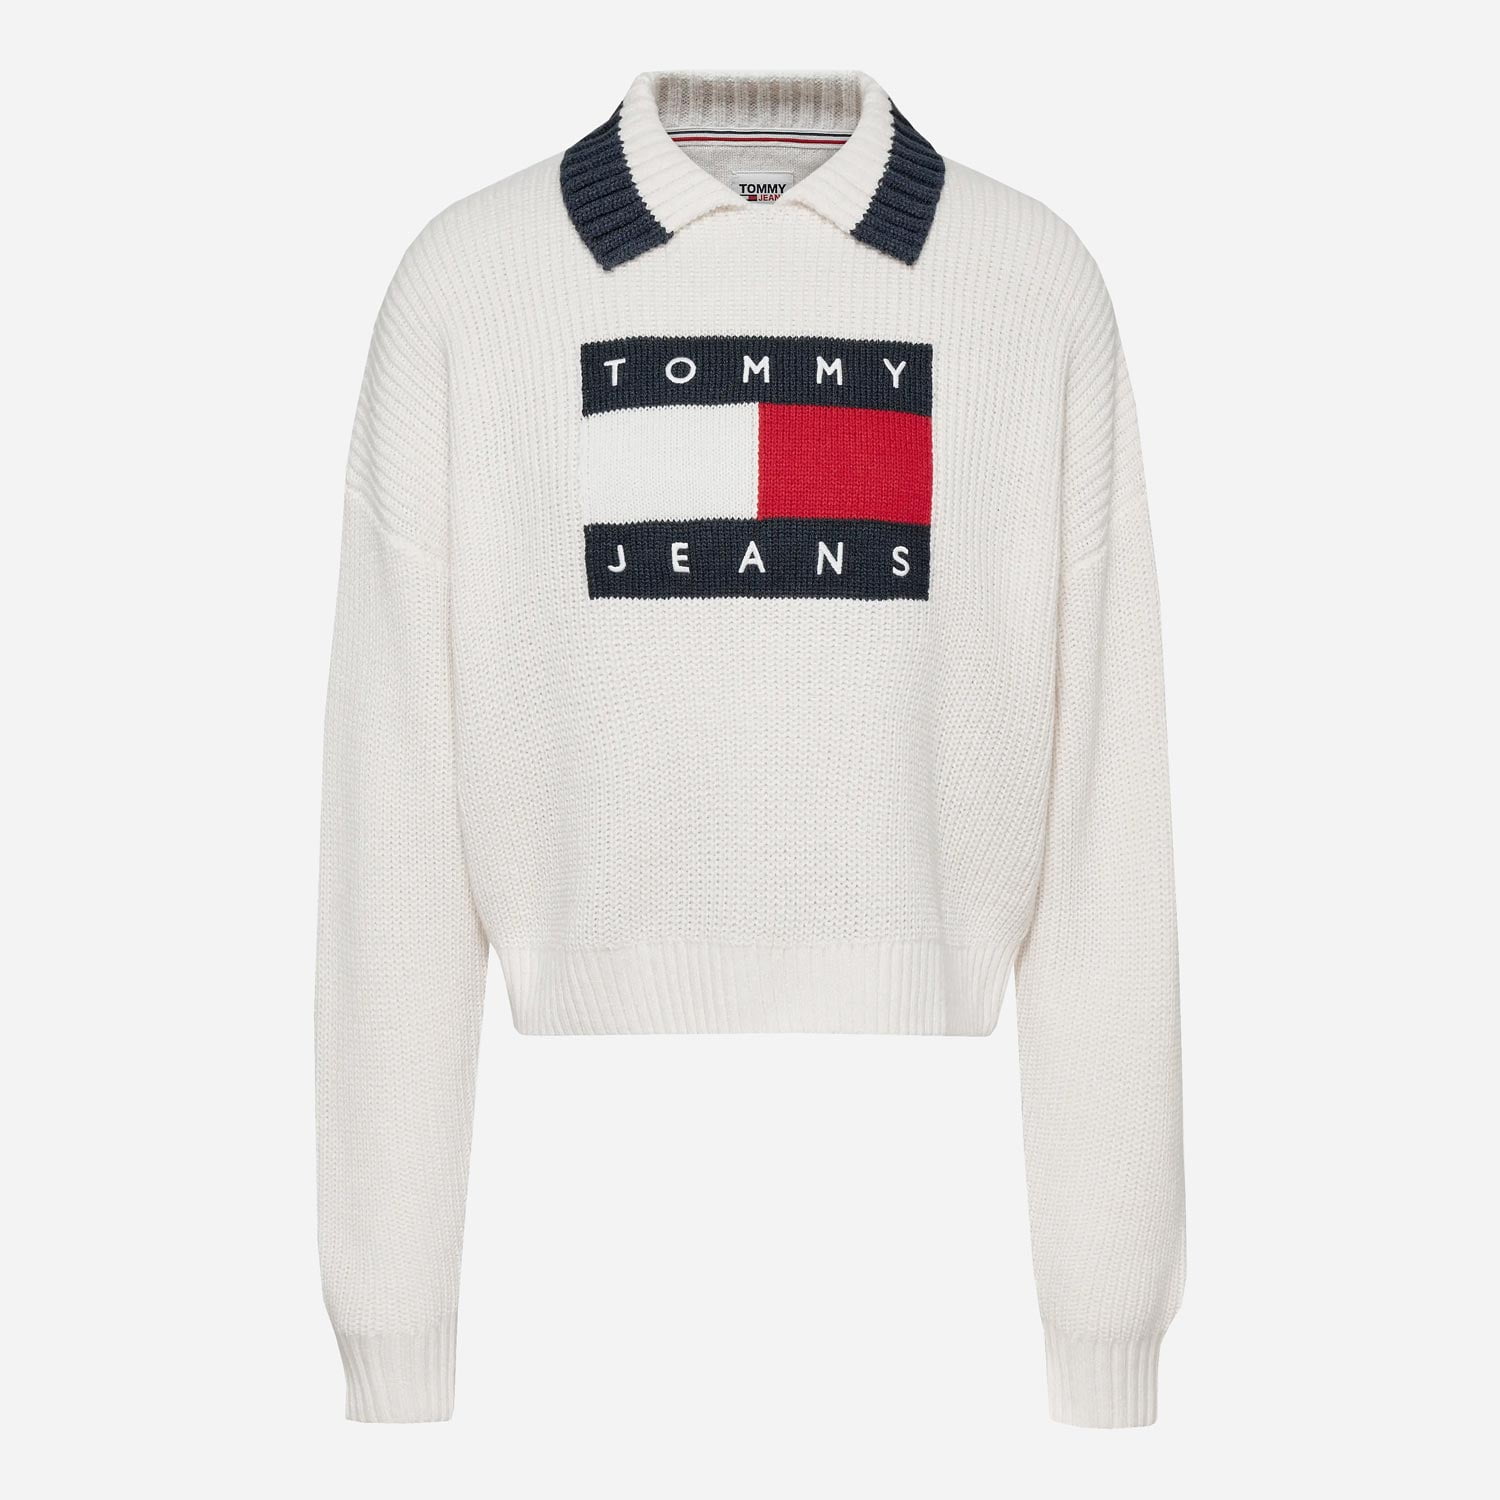 Tommy Jeans Women's Intarsia Flag Collared Sweat - Ancient White